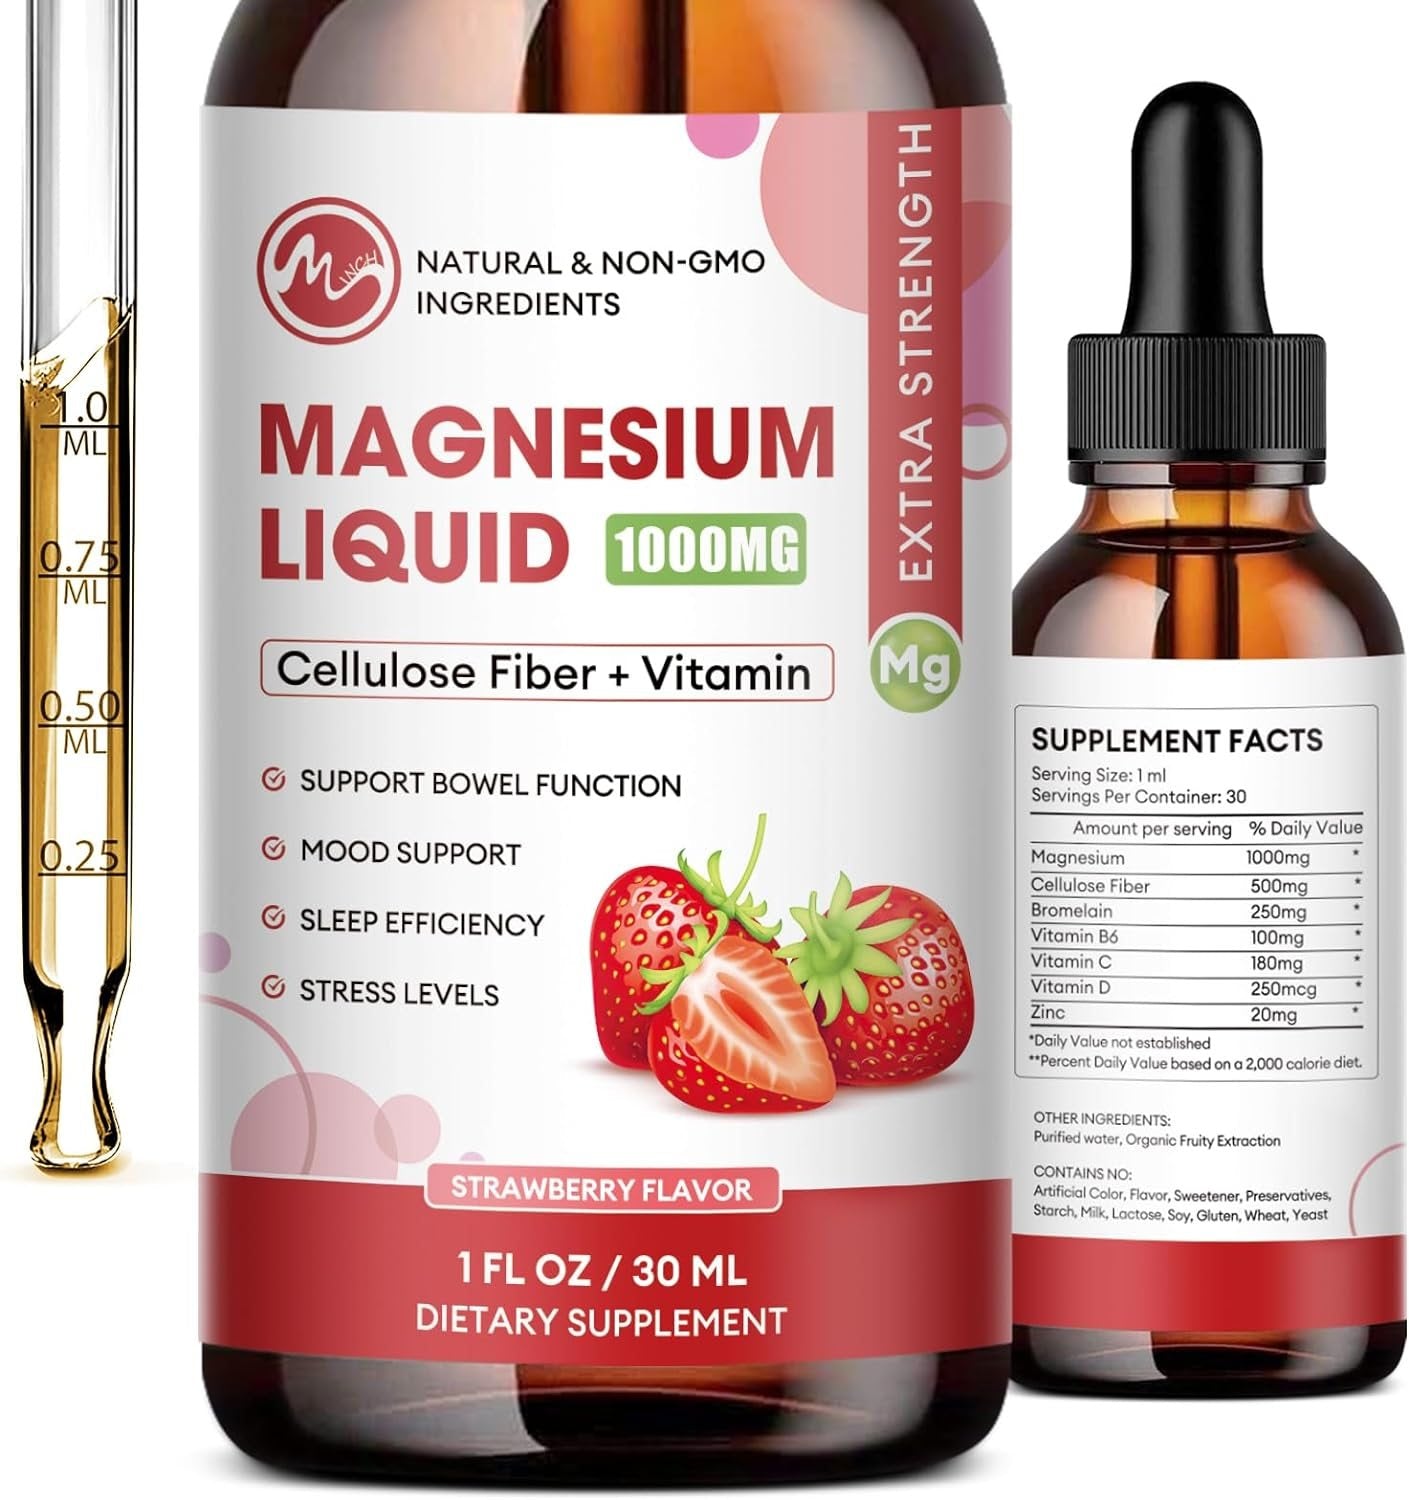 2 Packs-Strawberry Flavor-Magnesium Glycinate Supplement, Liquid Drops with Magnesium Glycinate 1000mg, Fiber 500mg, Bromelain, Vitamin B,C,D - Promotes Nerve, Bowel, Relaxation Function